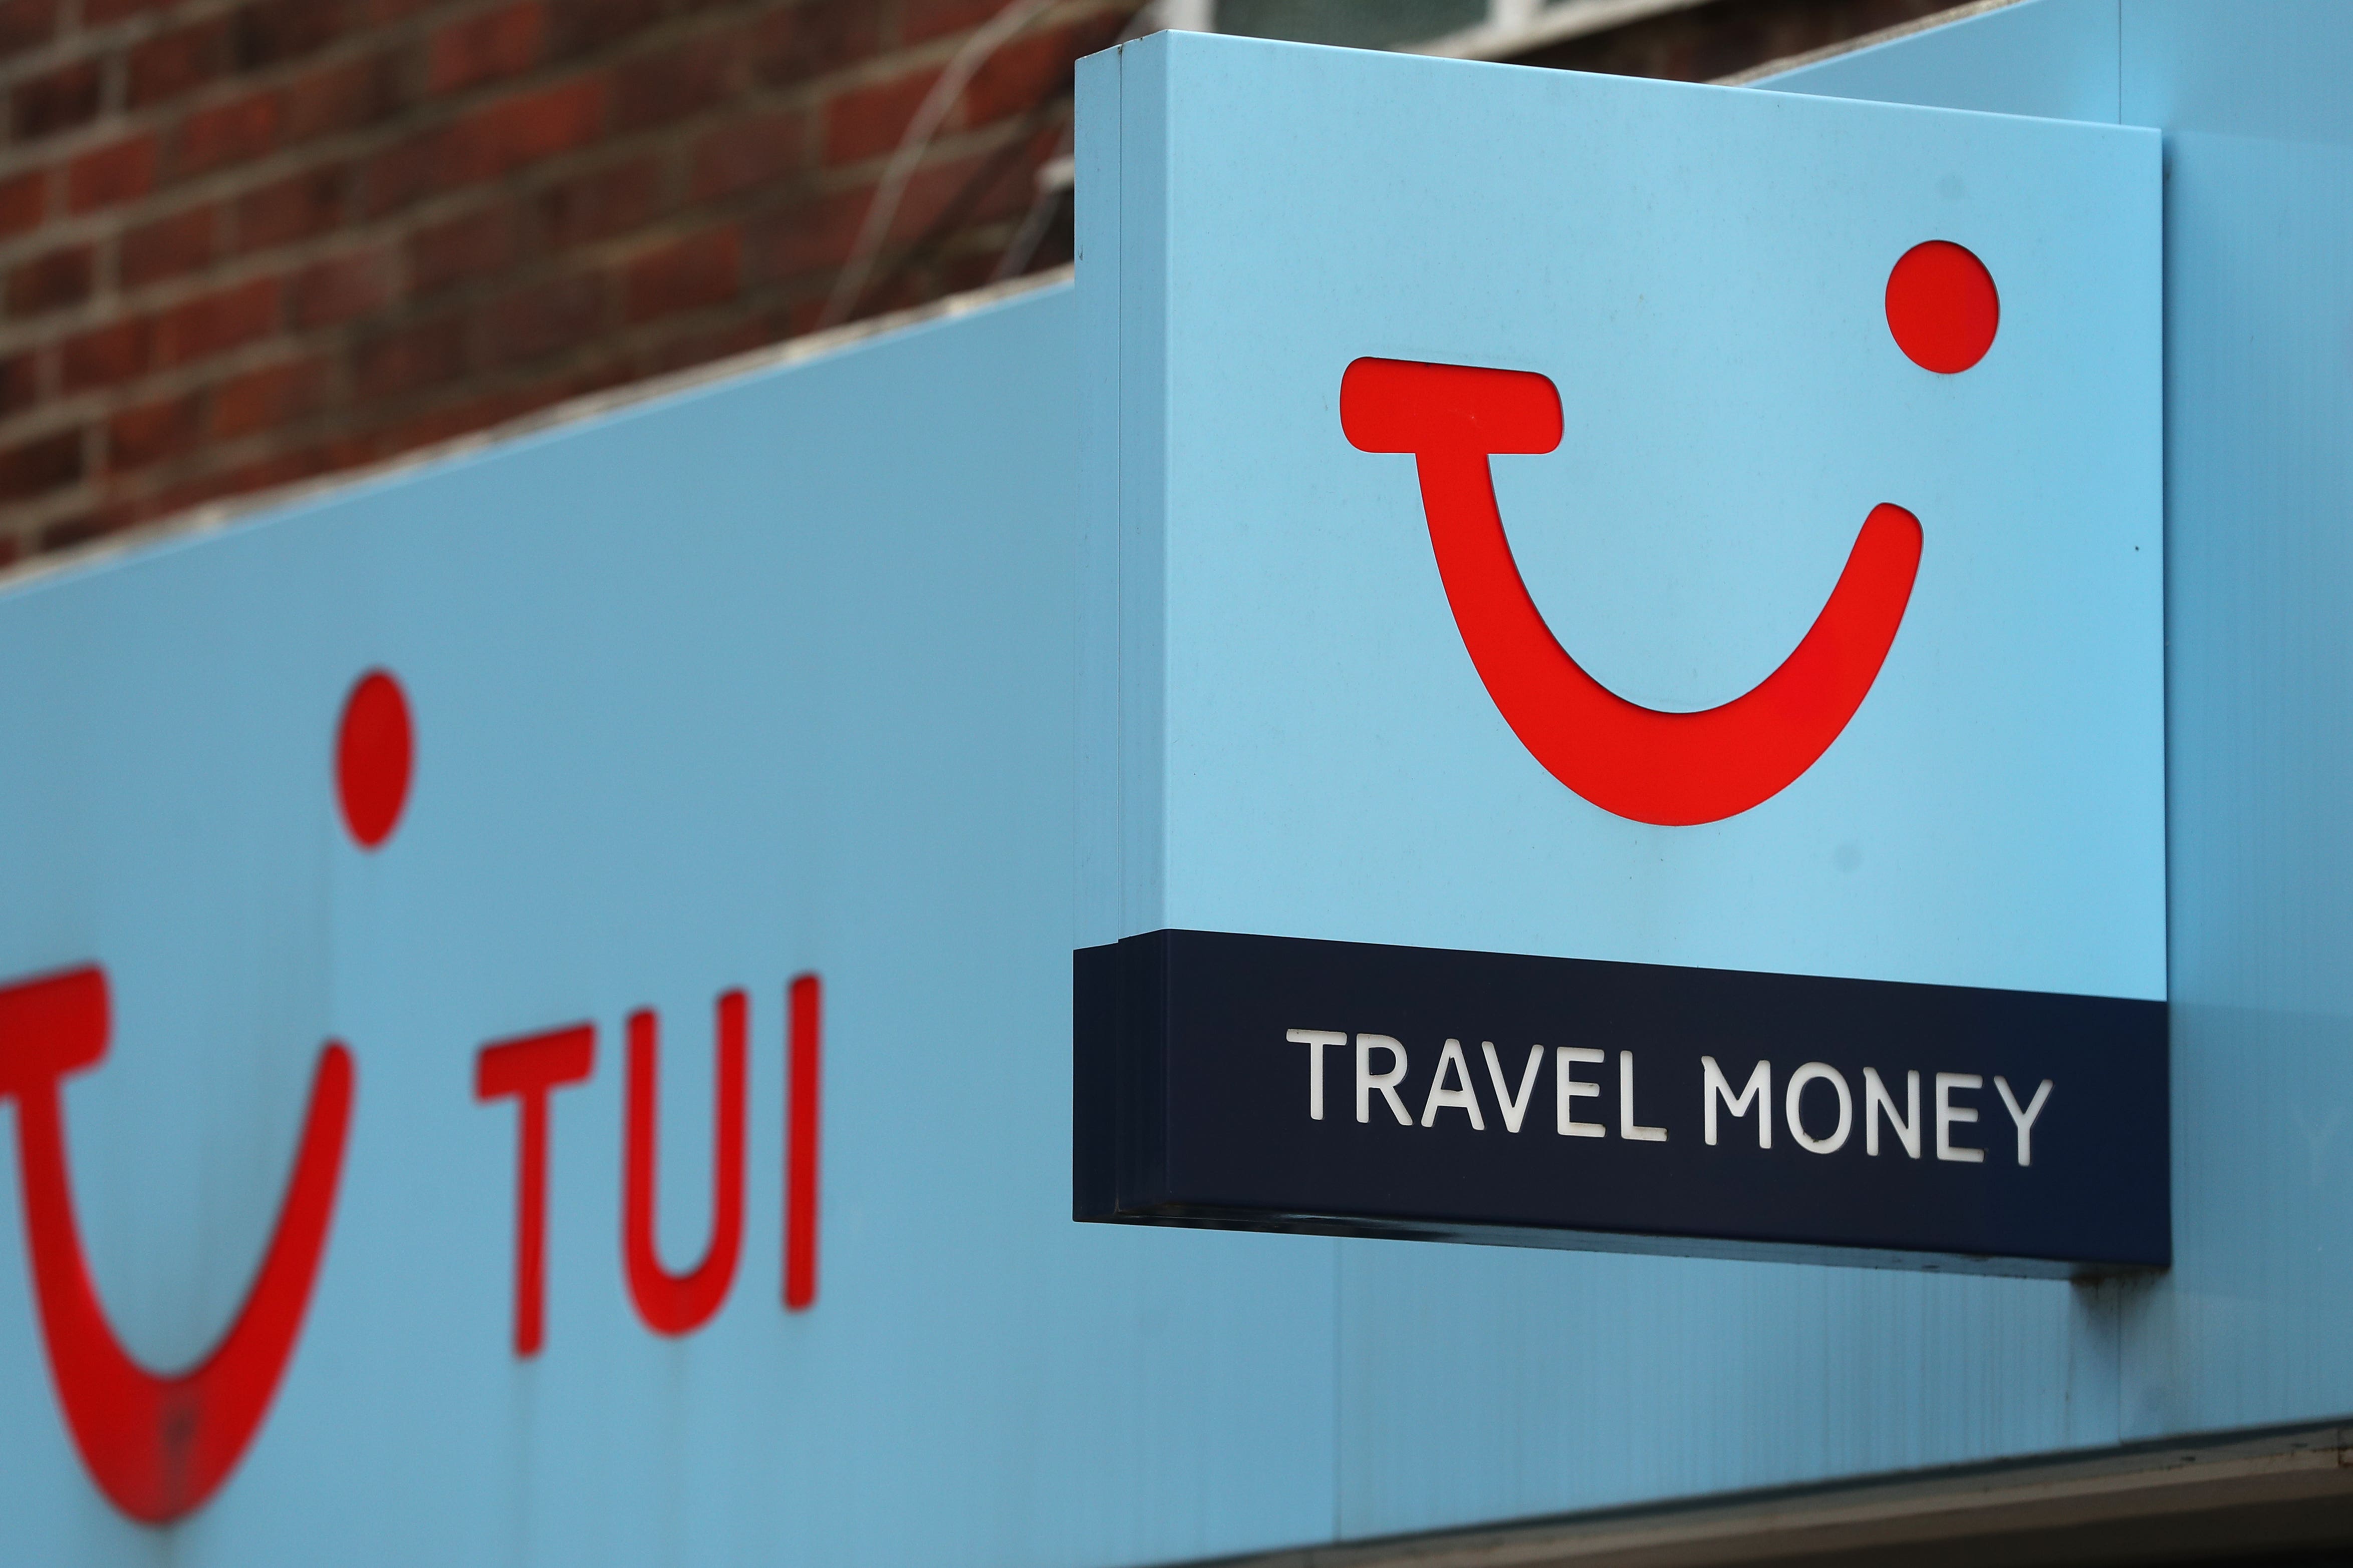 Holiday giant Tui has revealed better than expected results after notching up record revenues as it said travelling remains ‘very popular’ despite rising prices for trips abroad